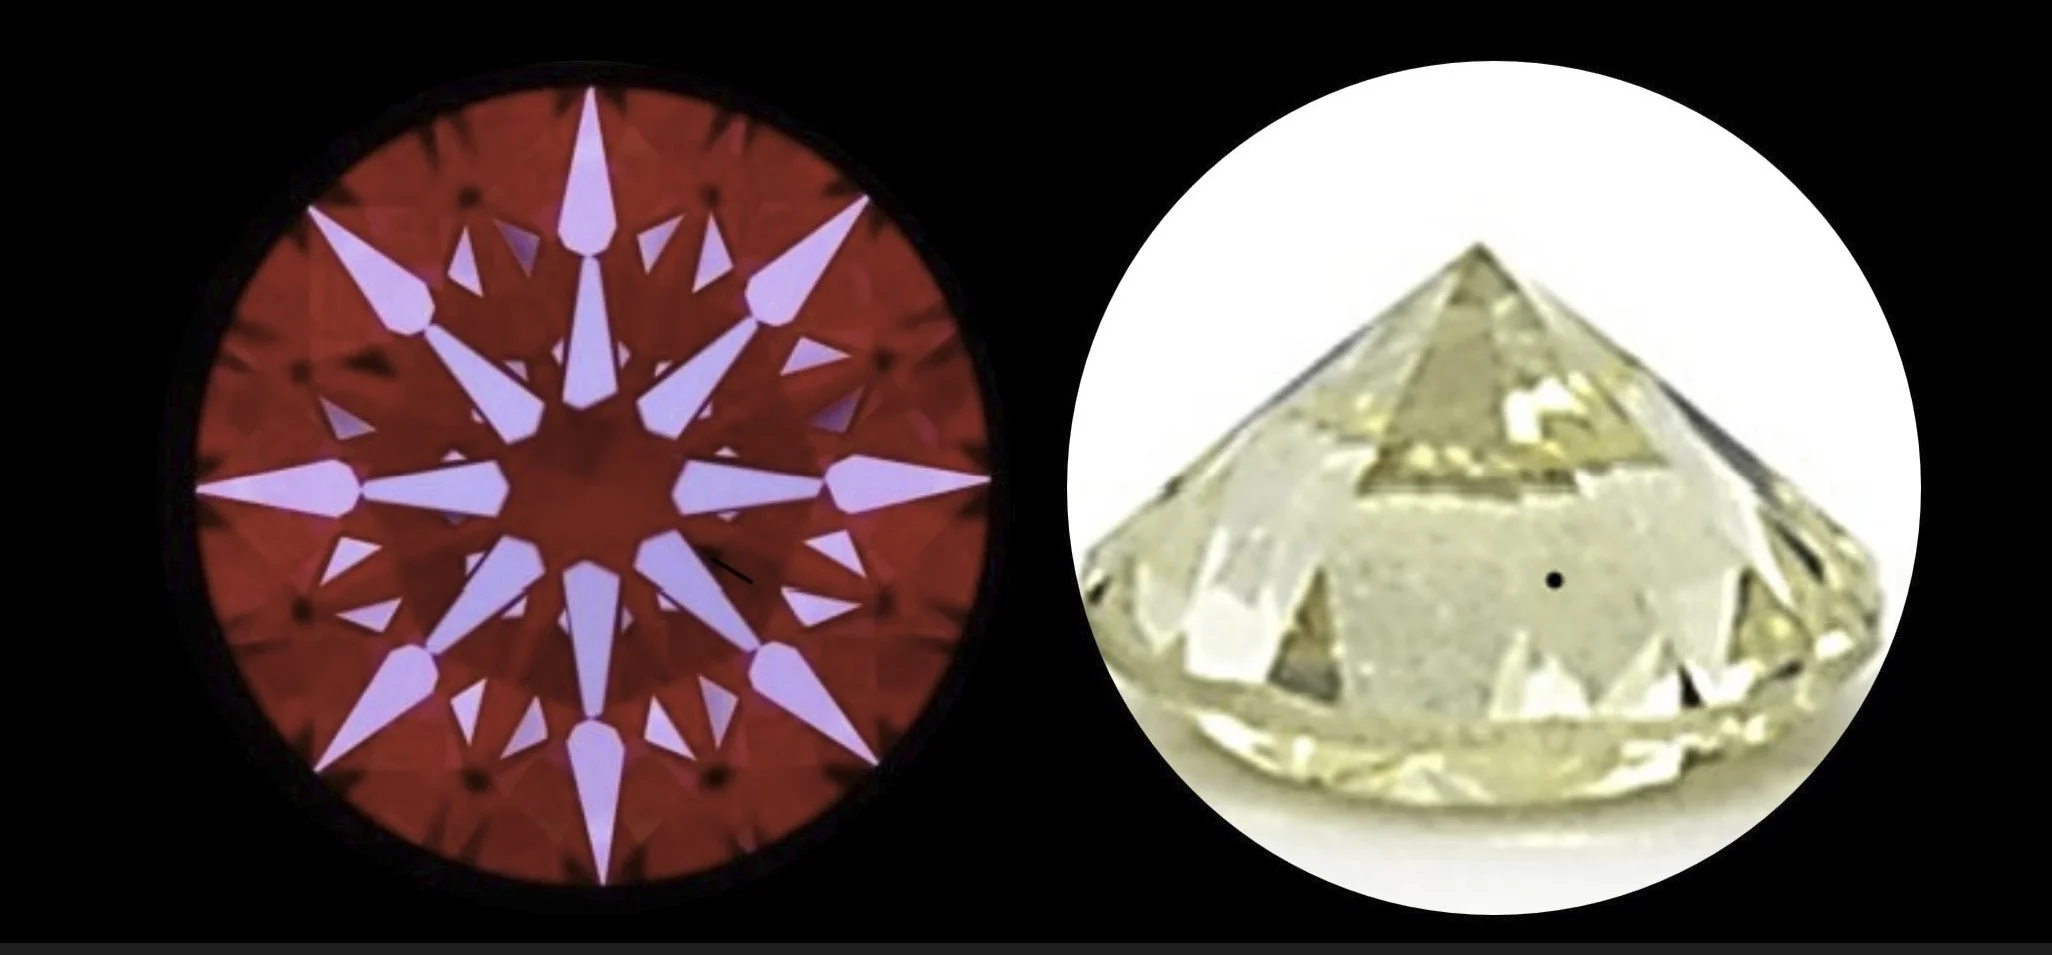 Diamond Cut vs. Color: Which is More Important?